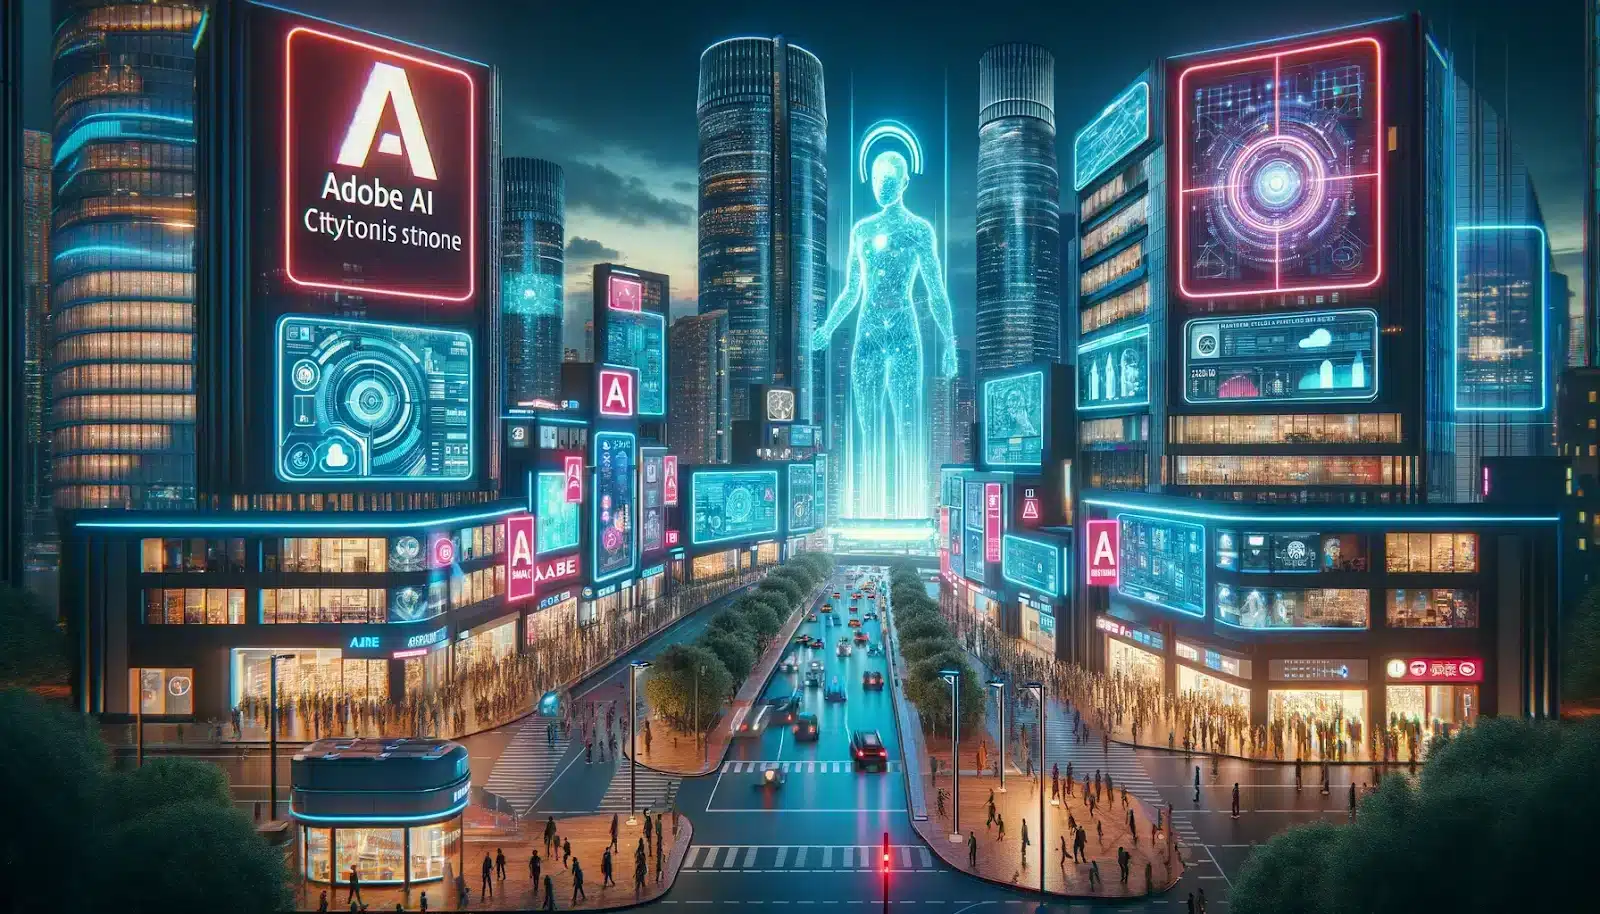 Viibrant with neon lights, showcasing skyscrapers and augmented reality interfaces.